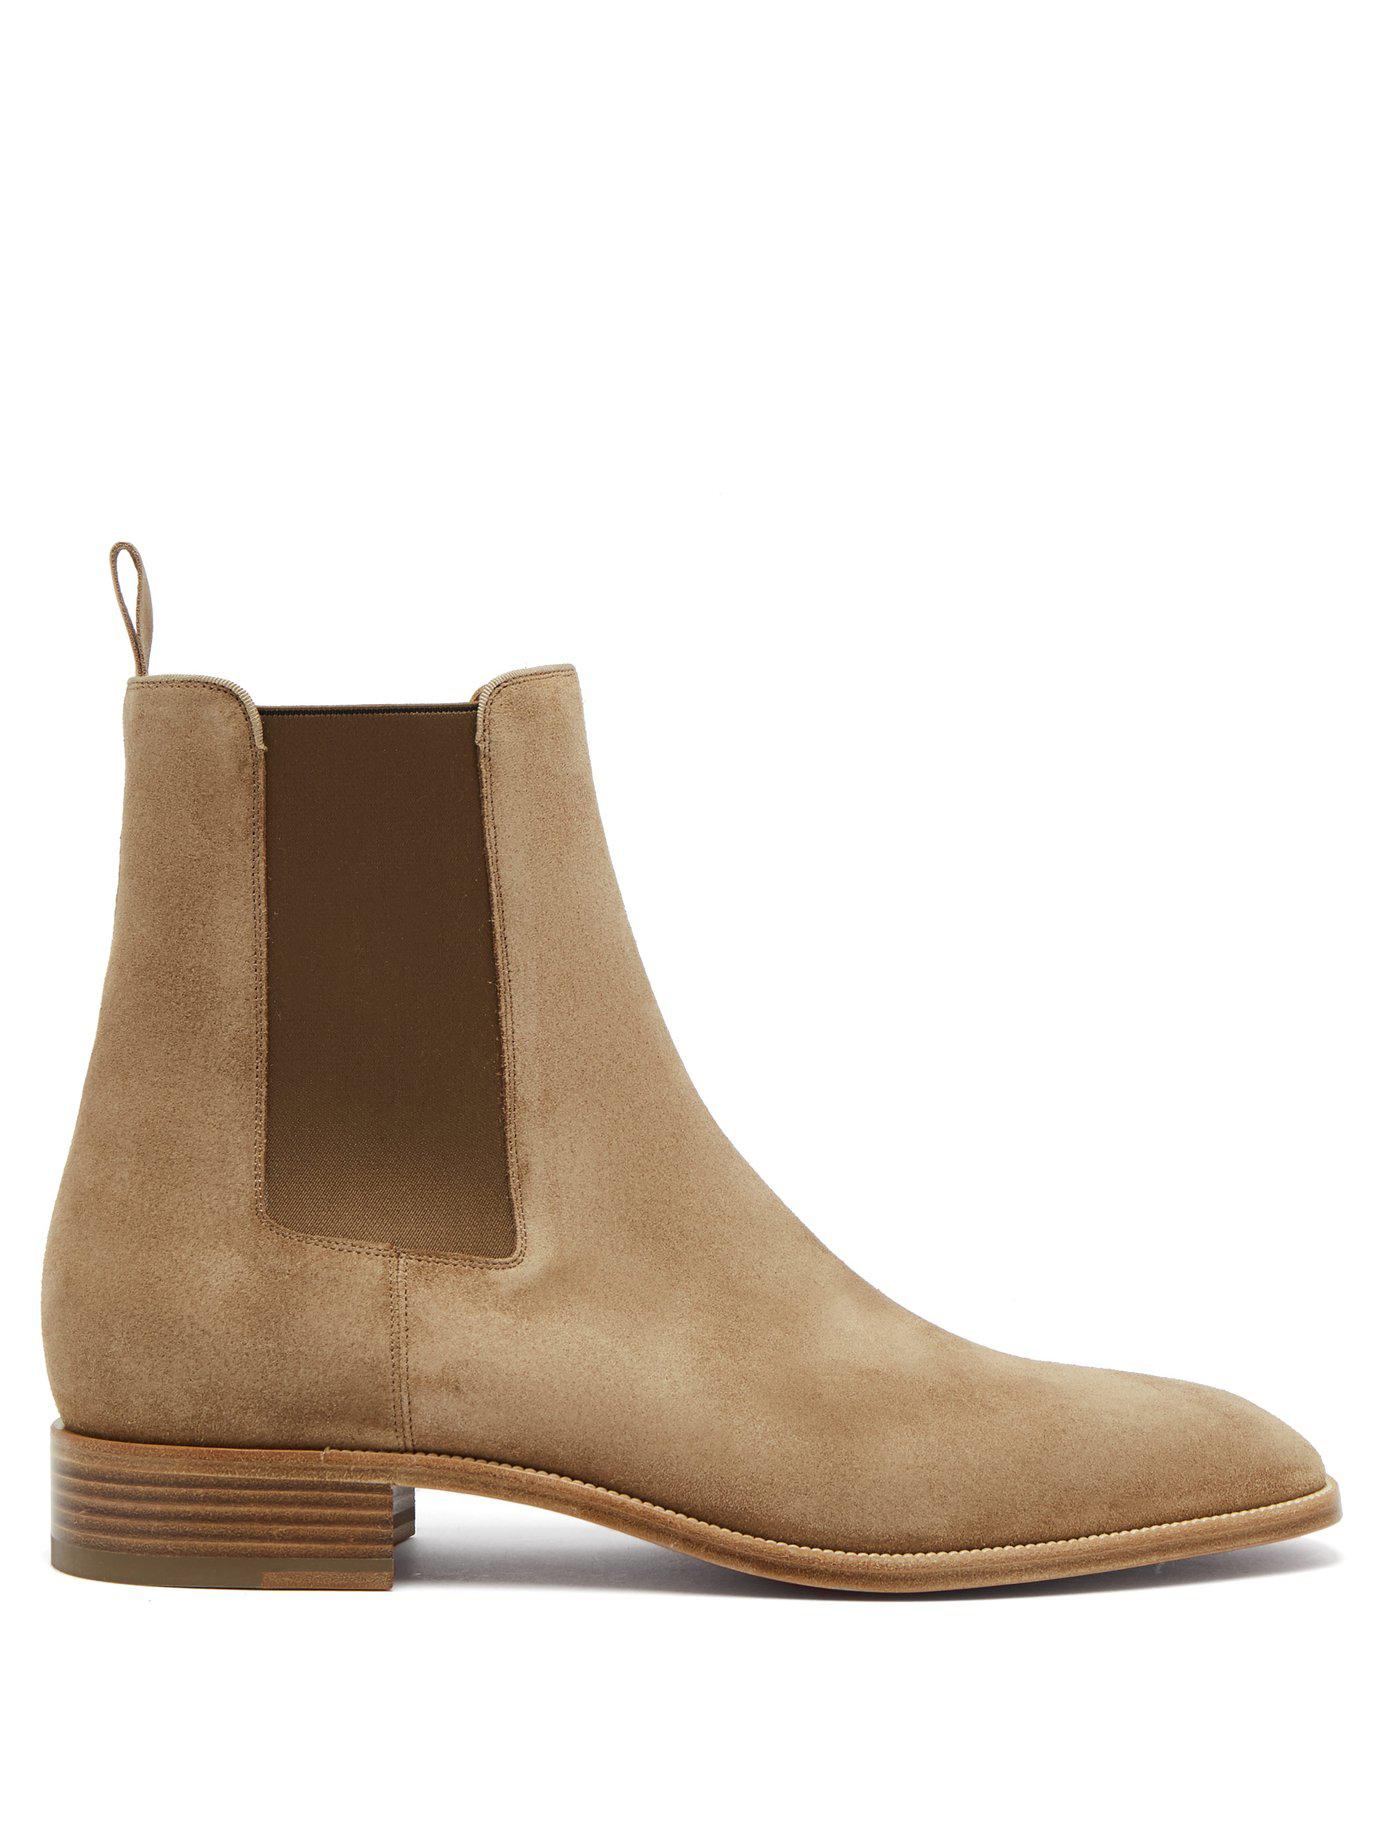 Christian Louboutin Samson Suede Chelsea Boots in Natural for Men | Lyst